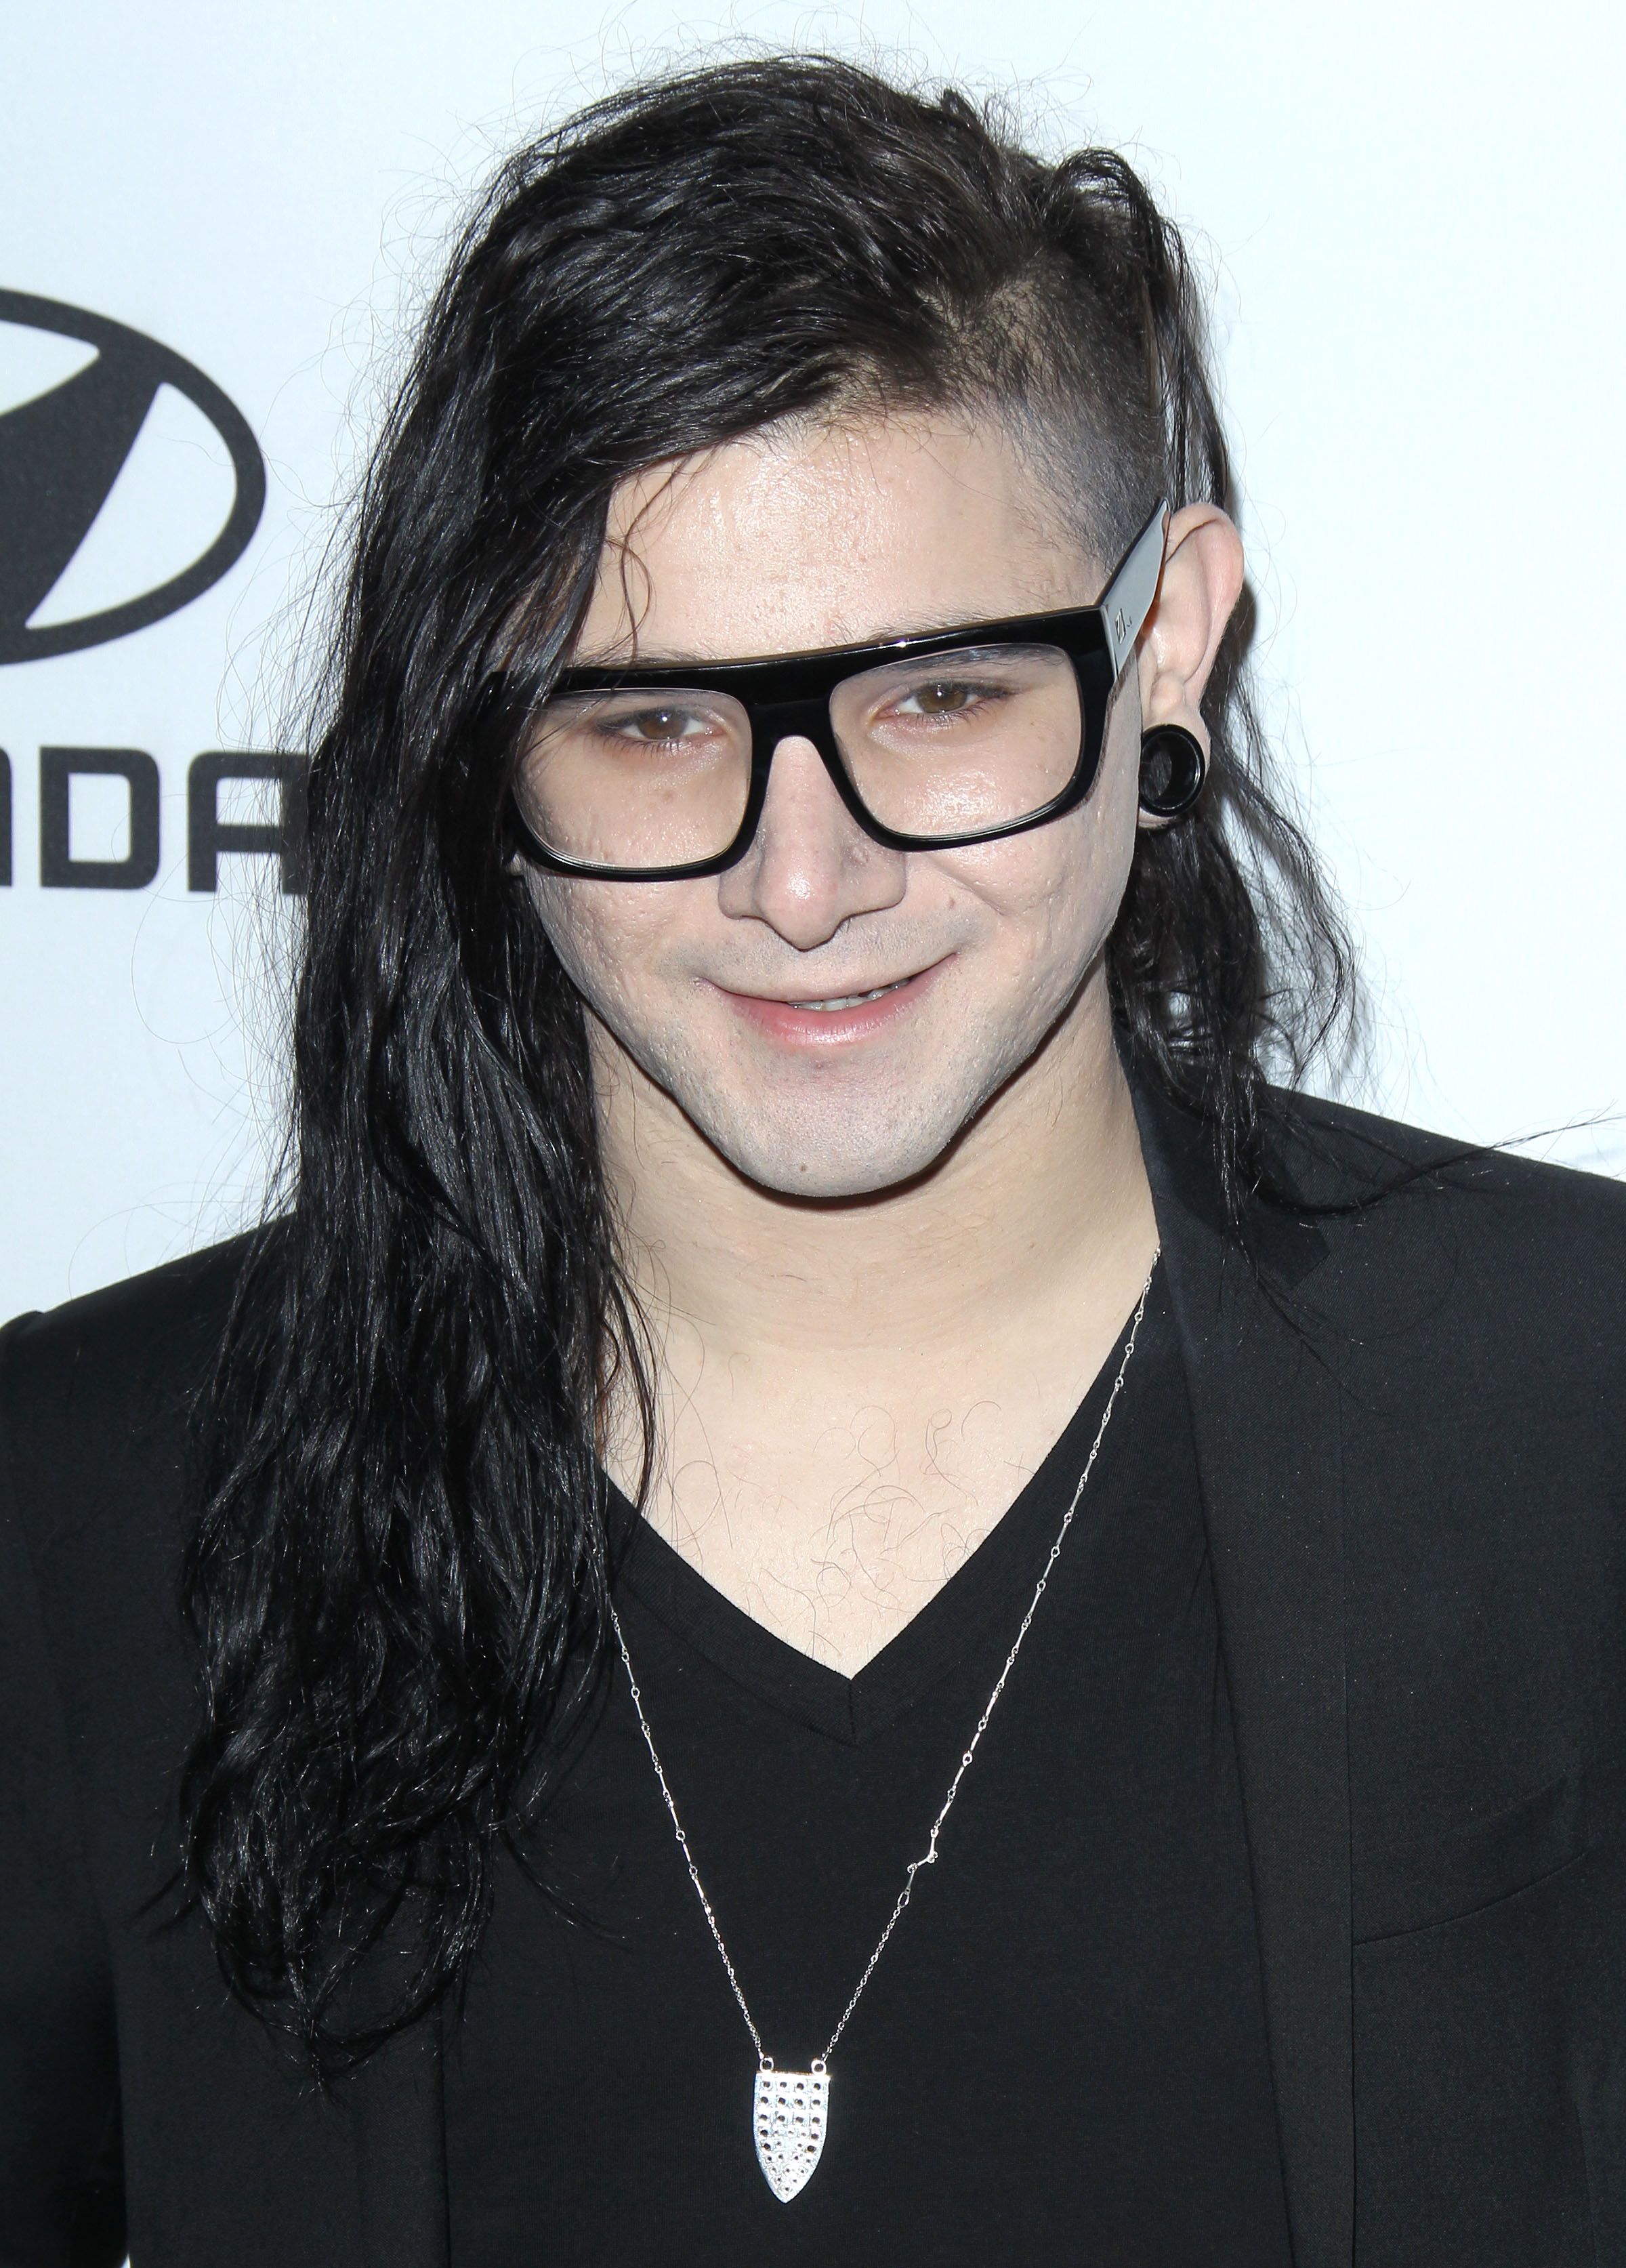 Hear Nineteen Skrillex Songs Played at Once